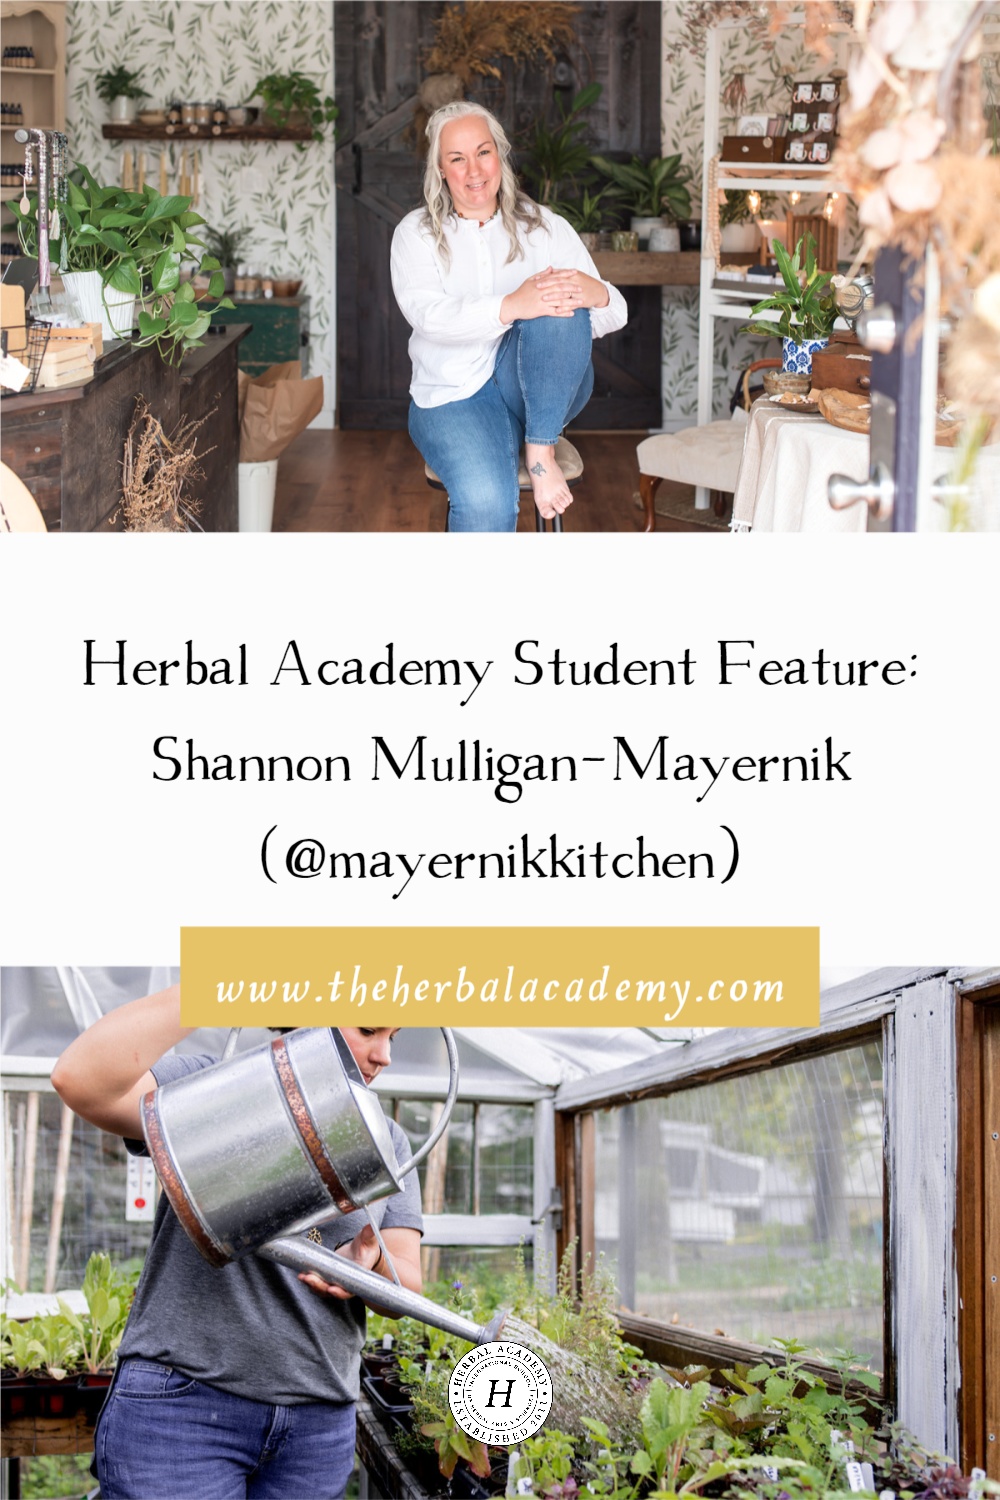 Herbal Academy Student Interview: Shannon Mulligan-Mayernik (@mayernikkitchen) | Herbal Academy | Shannon Mulligan-Mayernik owns Mayernik Kitchen, an apothecary located in New Jersey. She grows her own herbs and offers classes to her community.